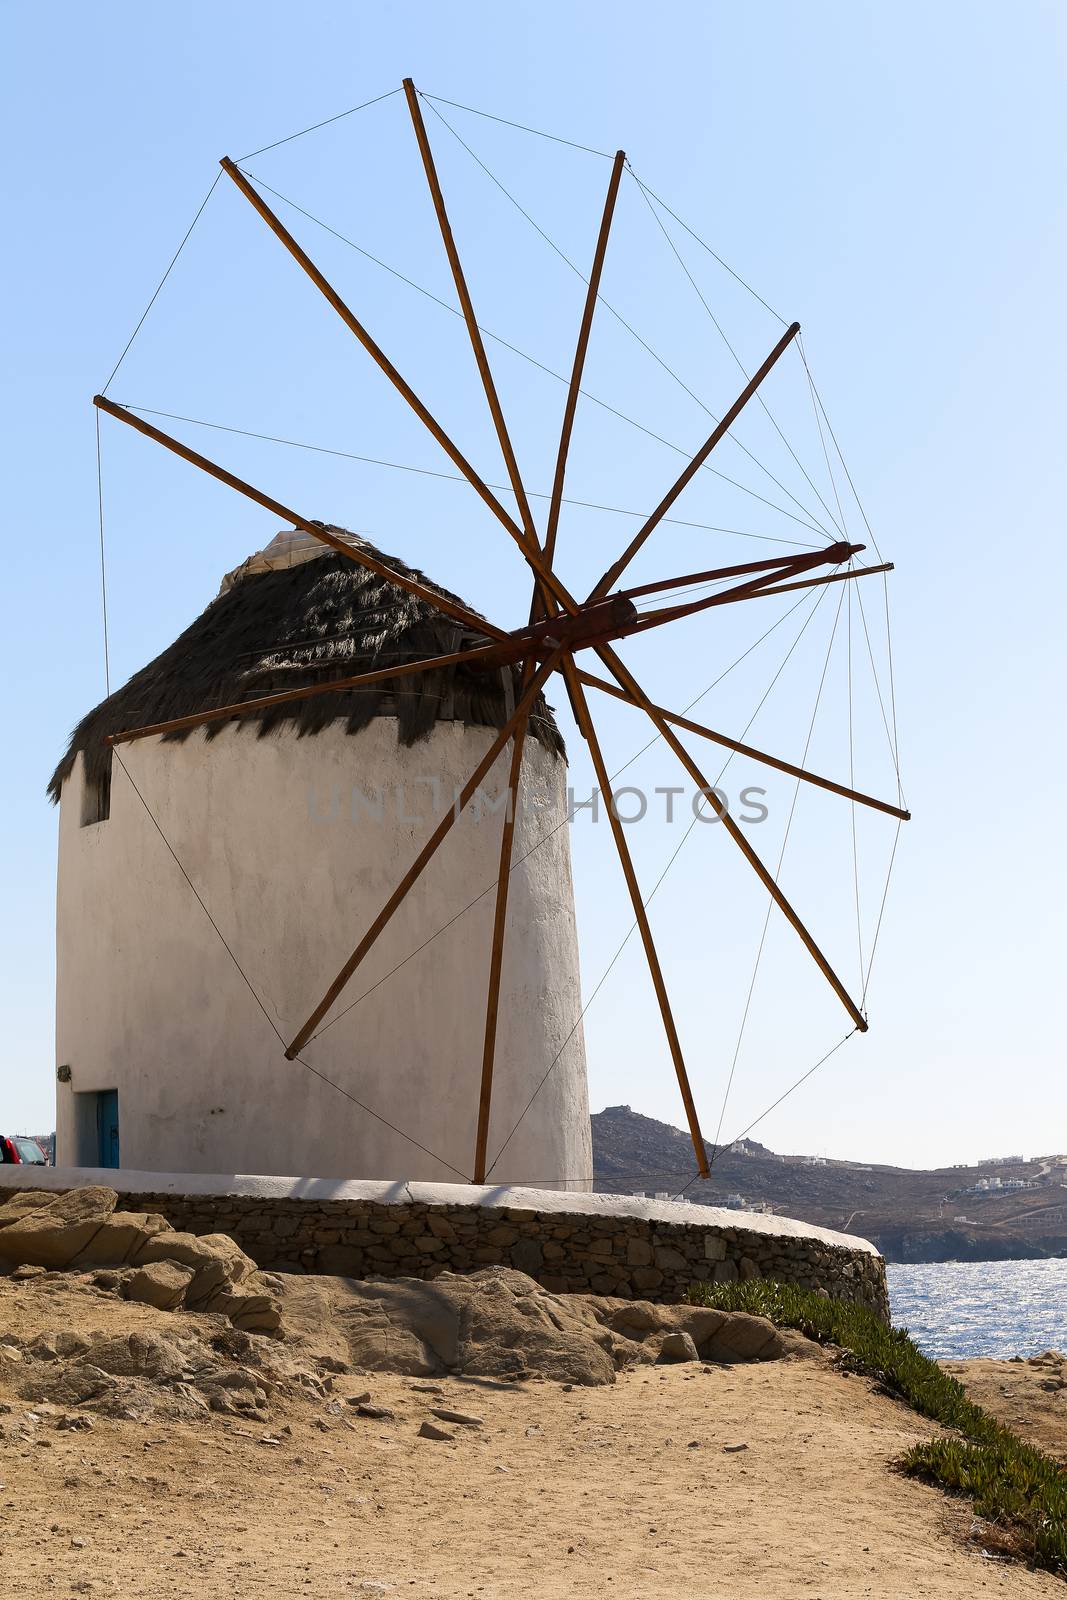 The famous wind mills in Mykonos during day time